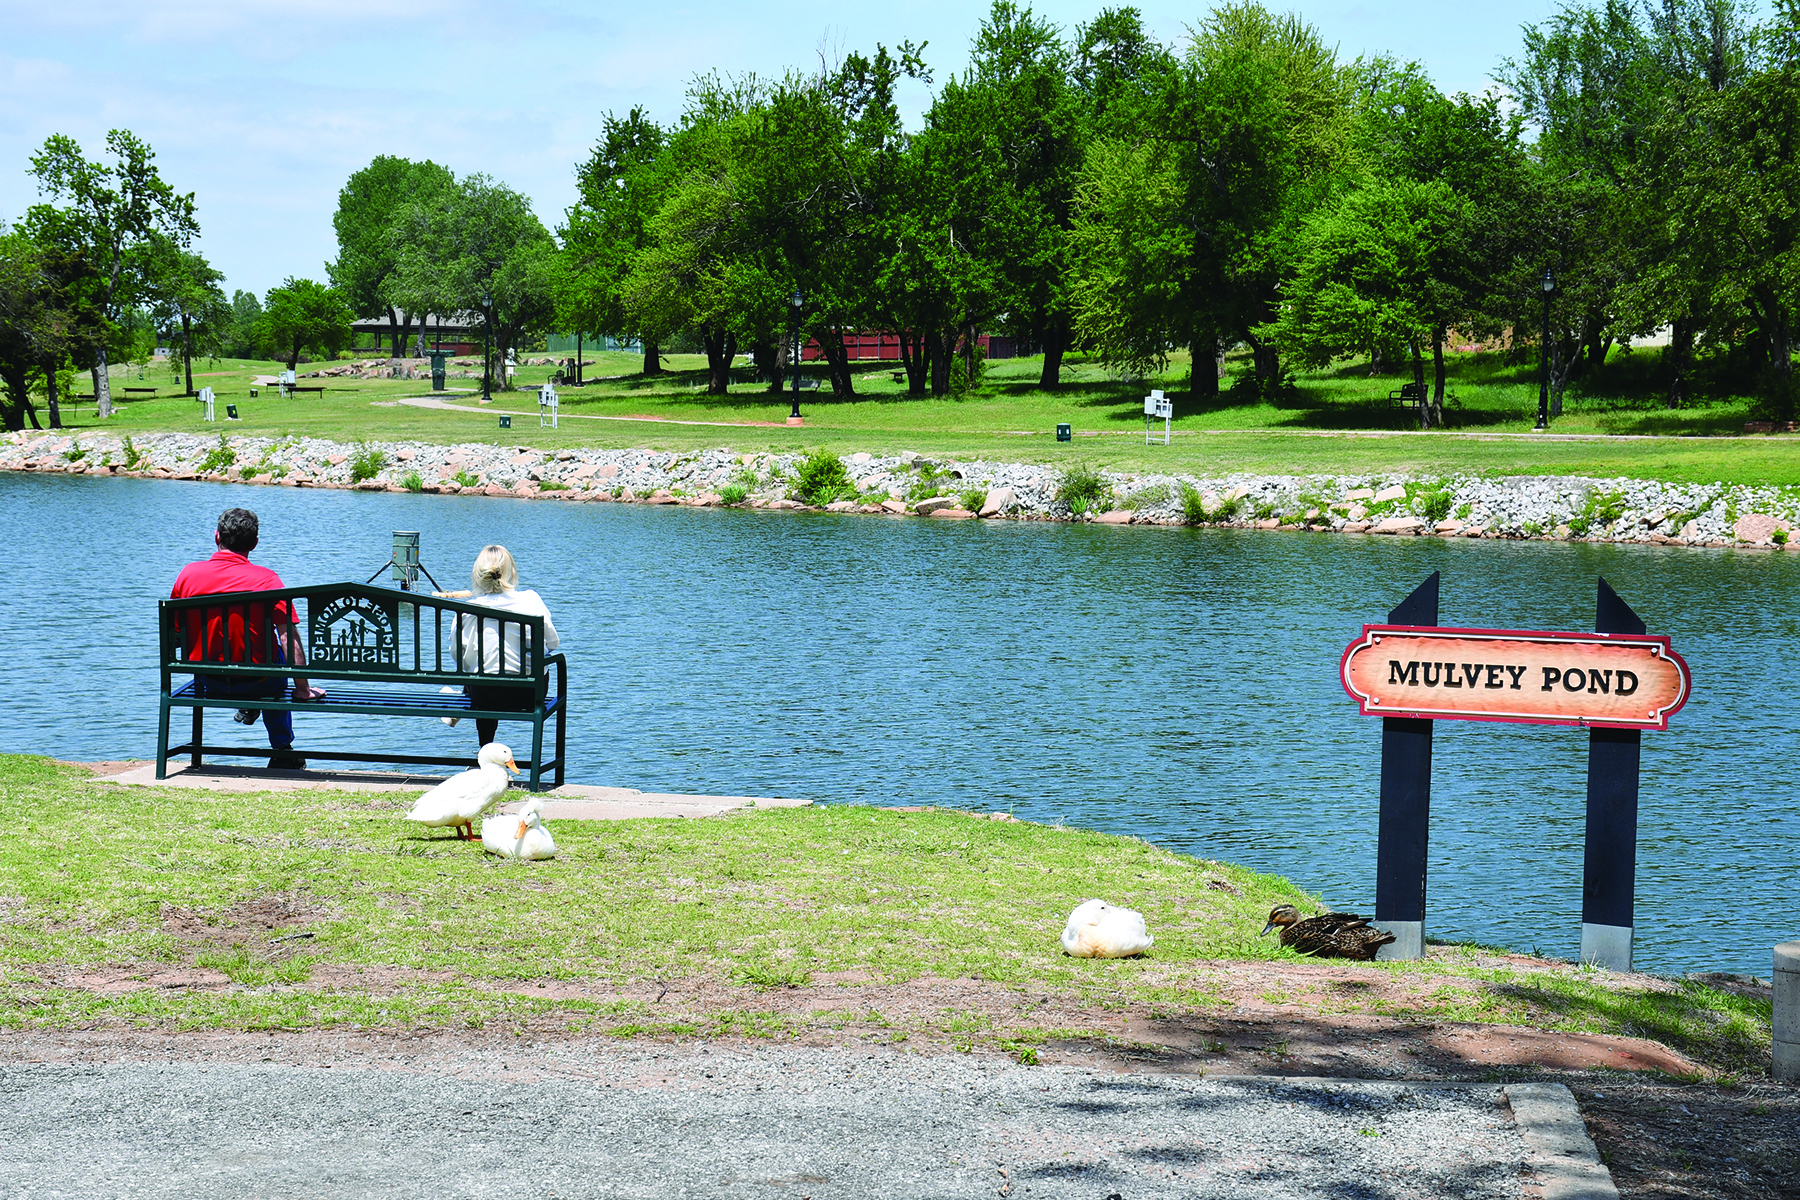 Mulvey Pond is one of the centerpieces of the gorgeous park.